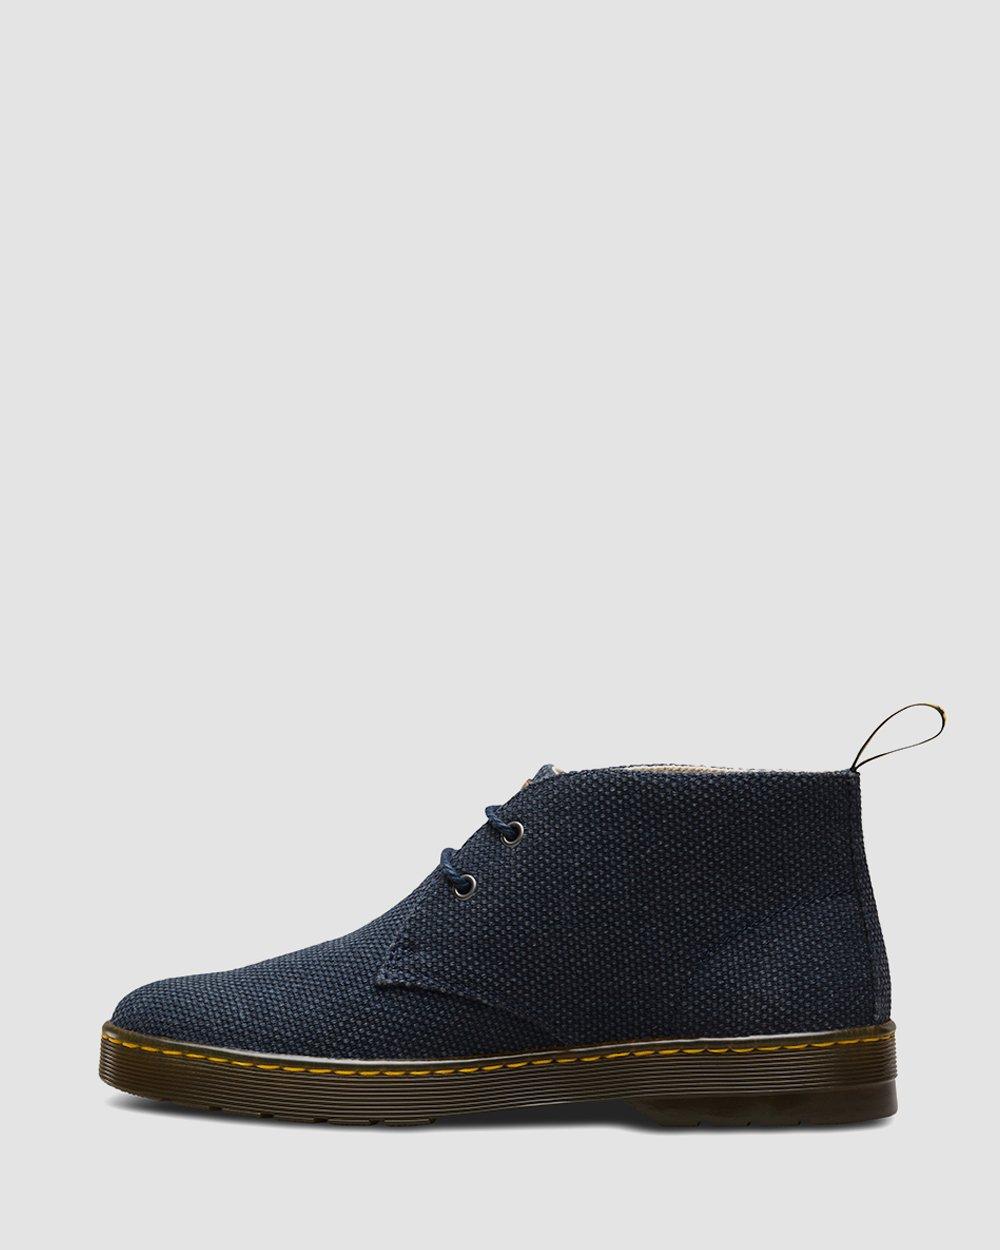 MAYPORT MILITARY CANVAS in Navy